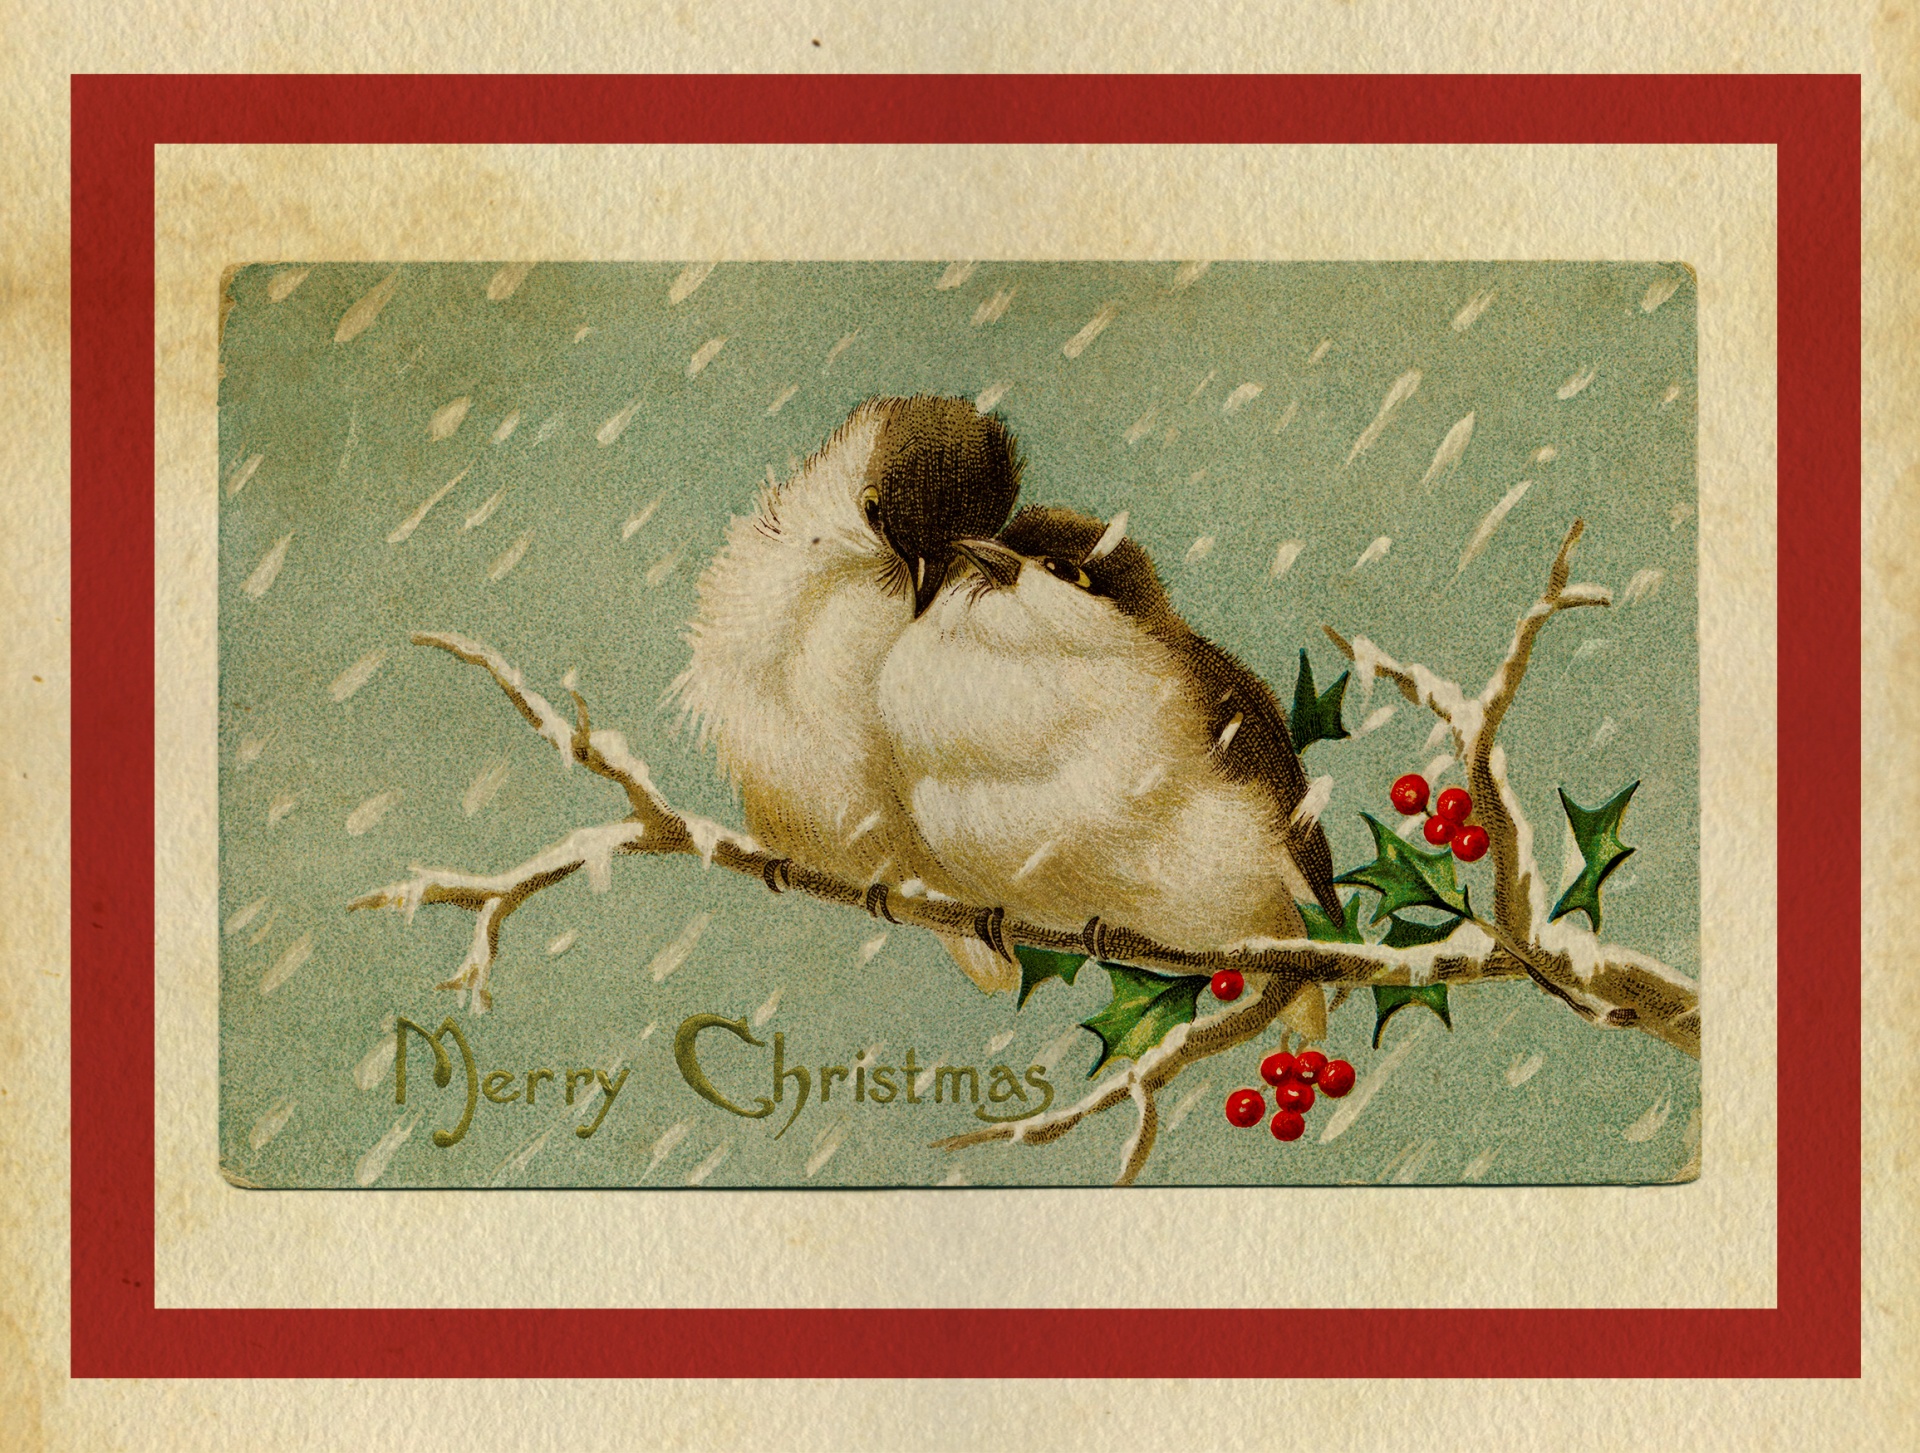 Vintage victorian christmas card of two birds on holly branch in snow illustration